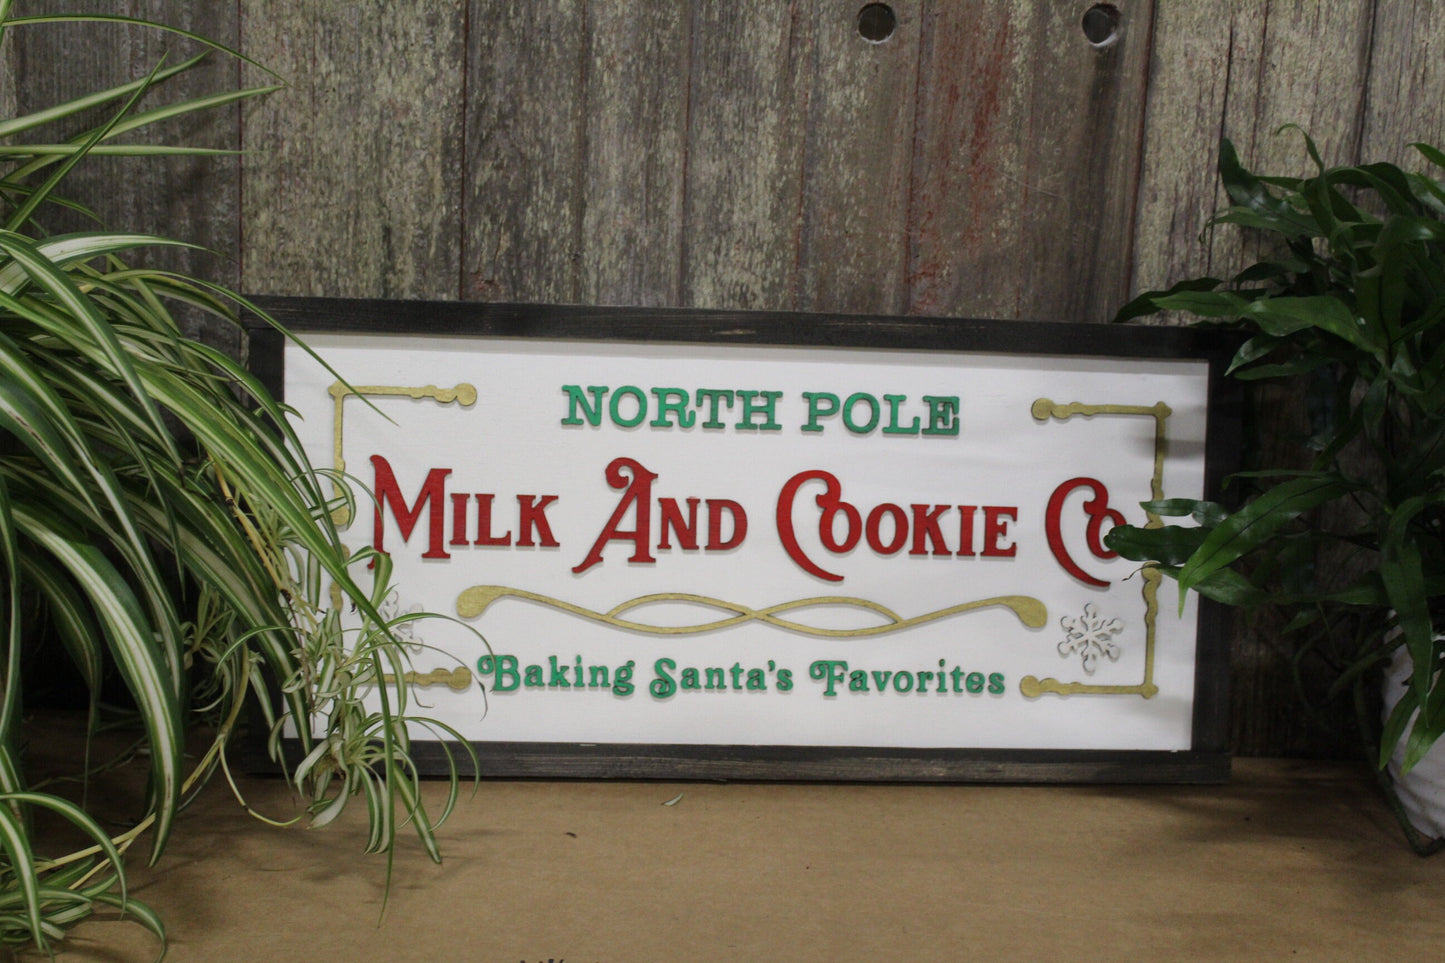 Milk and Cookie Company Wood Sign North Pole Baking Santas Favorite Cookies 3D Raised Text Christmas Decoration Wall Advertising